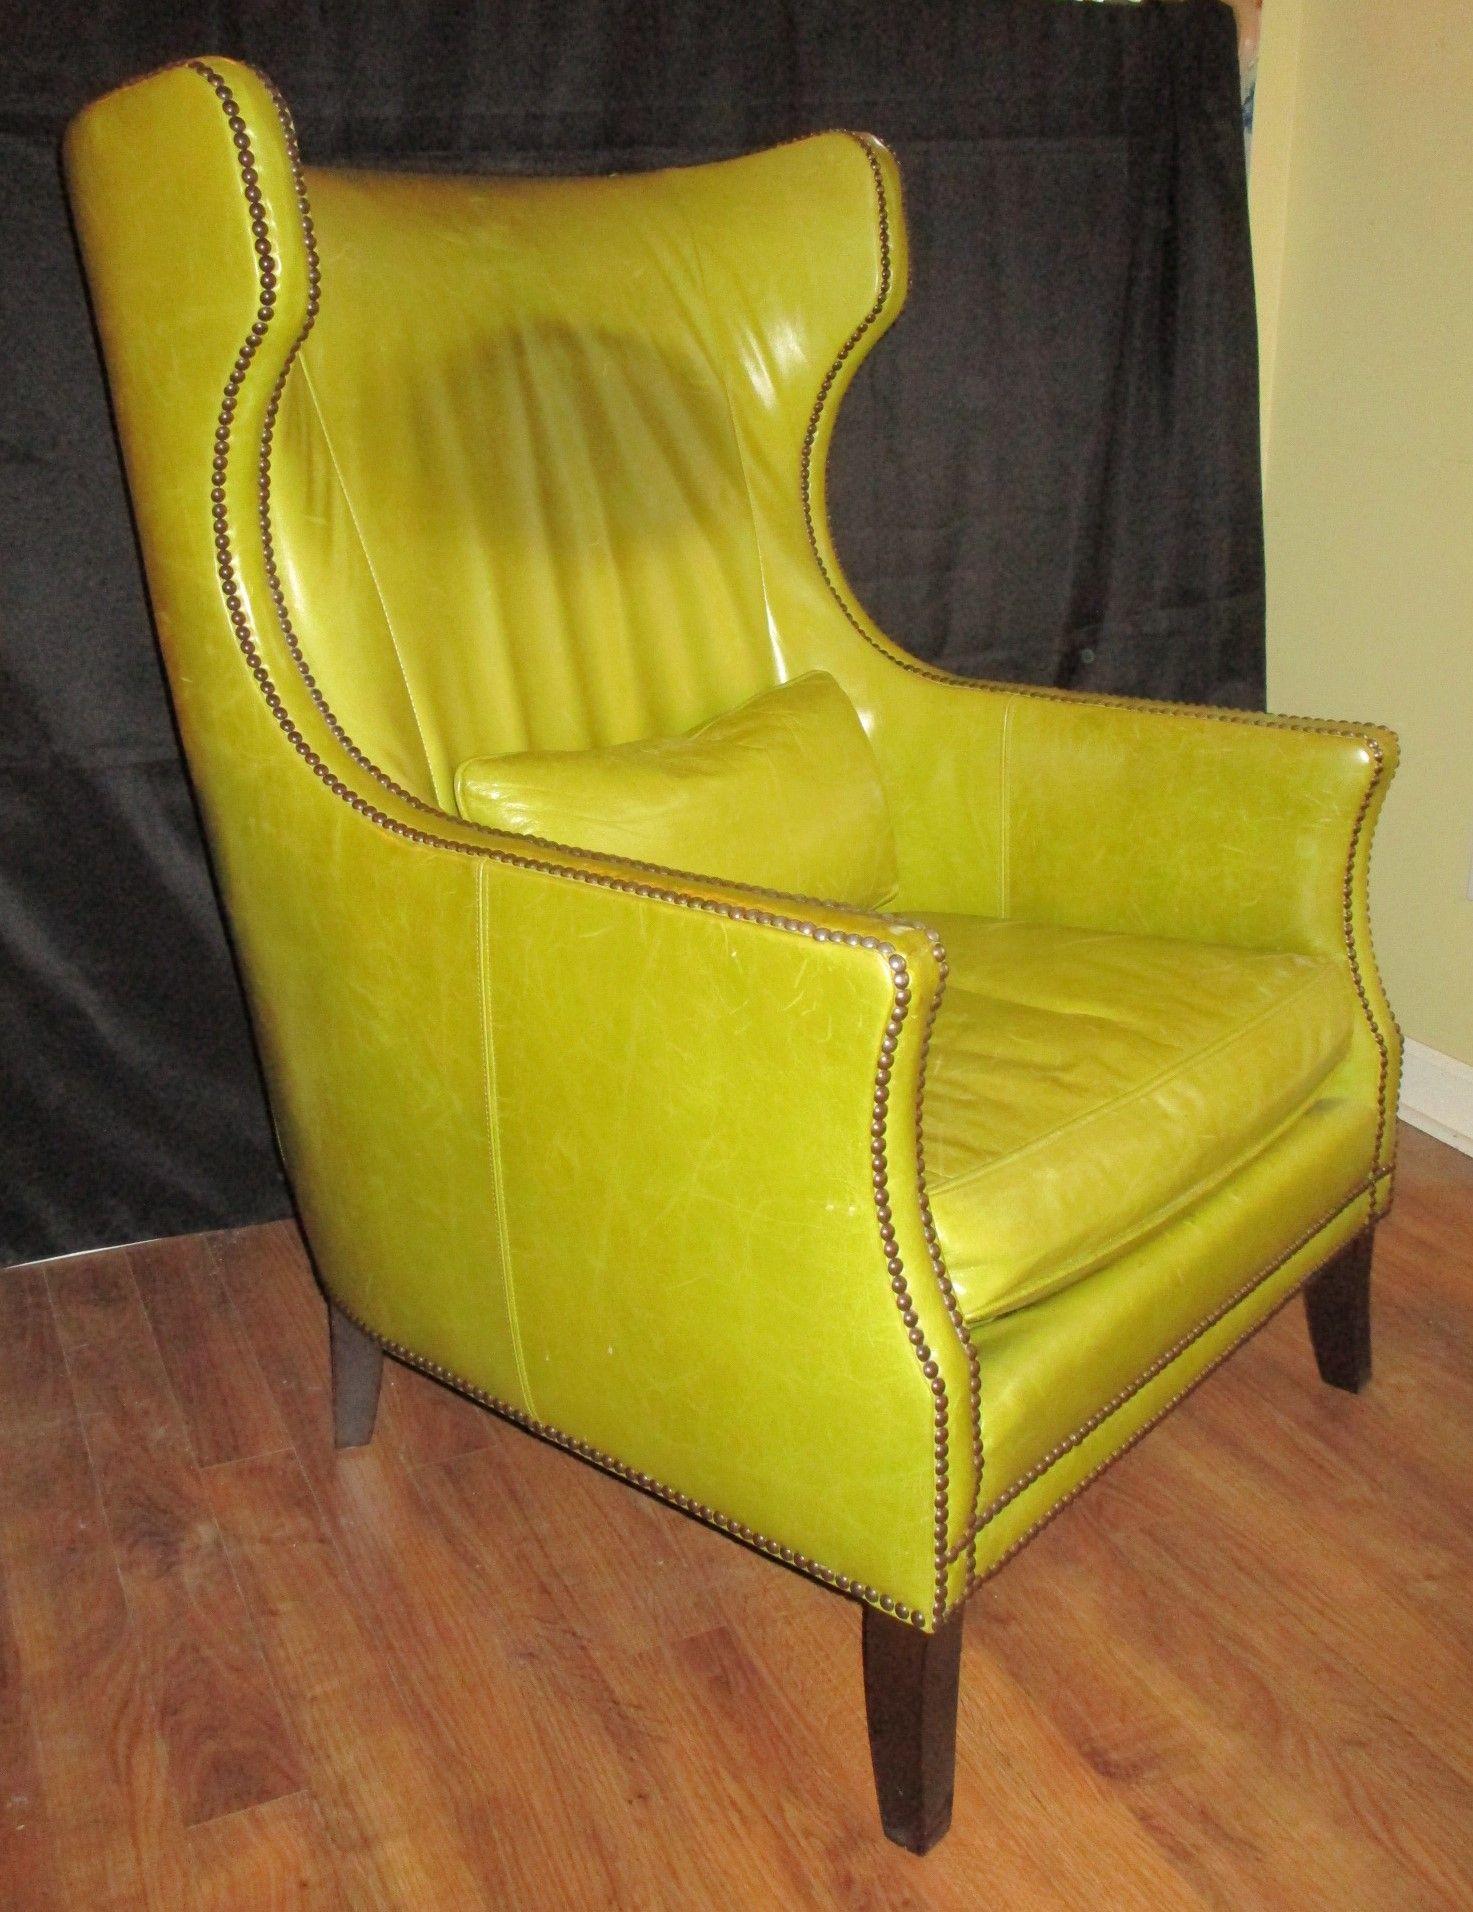 lovely Retro Style Bernhardt Wingback Arm Chair w/ Brad Accents - Just way  Cool & Comfy